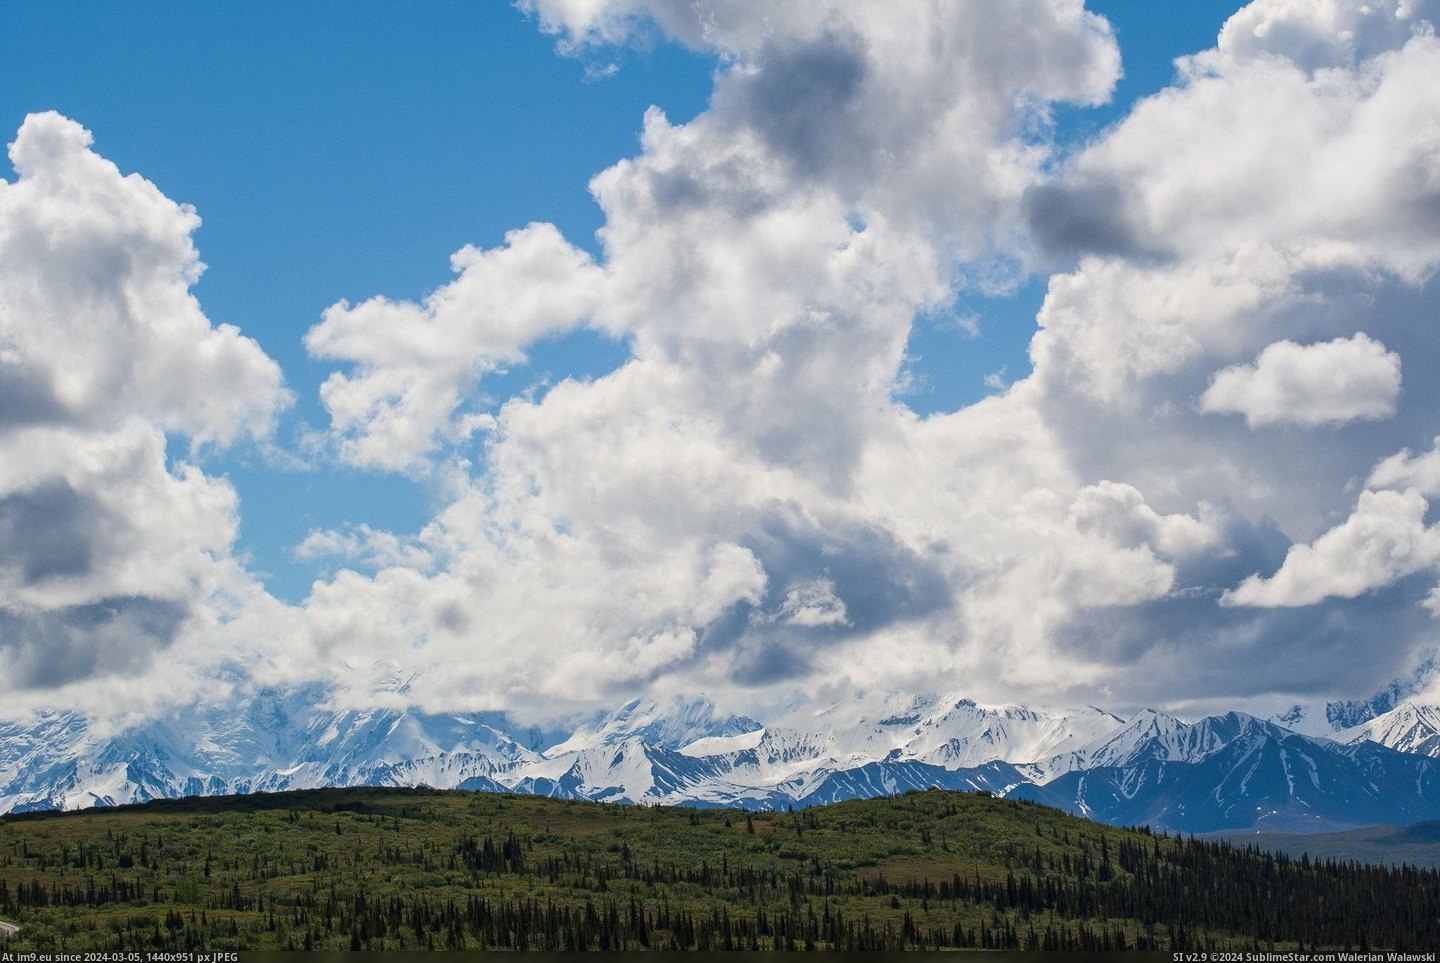 #Alaska #Range #Clouds [Earthporn] The Alaska Range near Mt. McKinley with Towering Clouds [2048x1635] Pic. (Изображение из альбом My r/EARTHPORN favs))